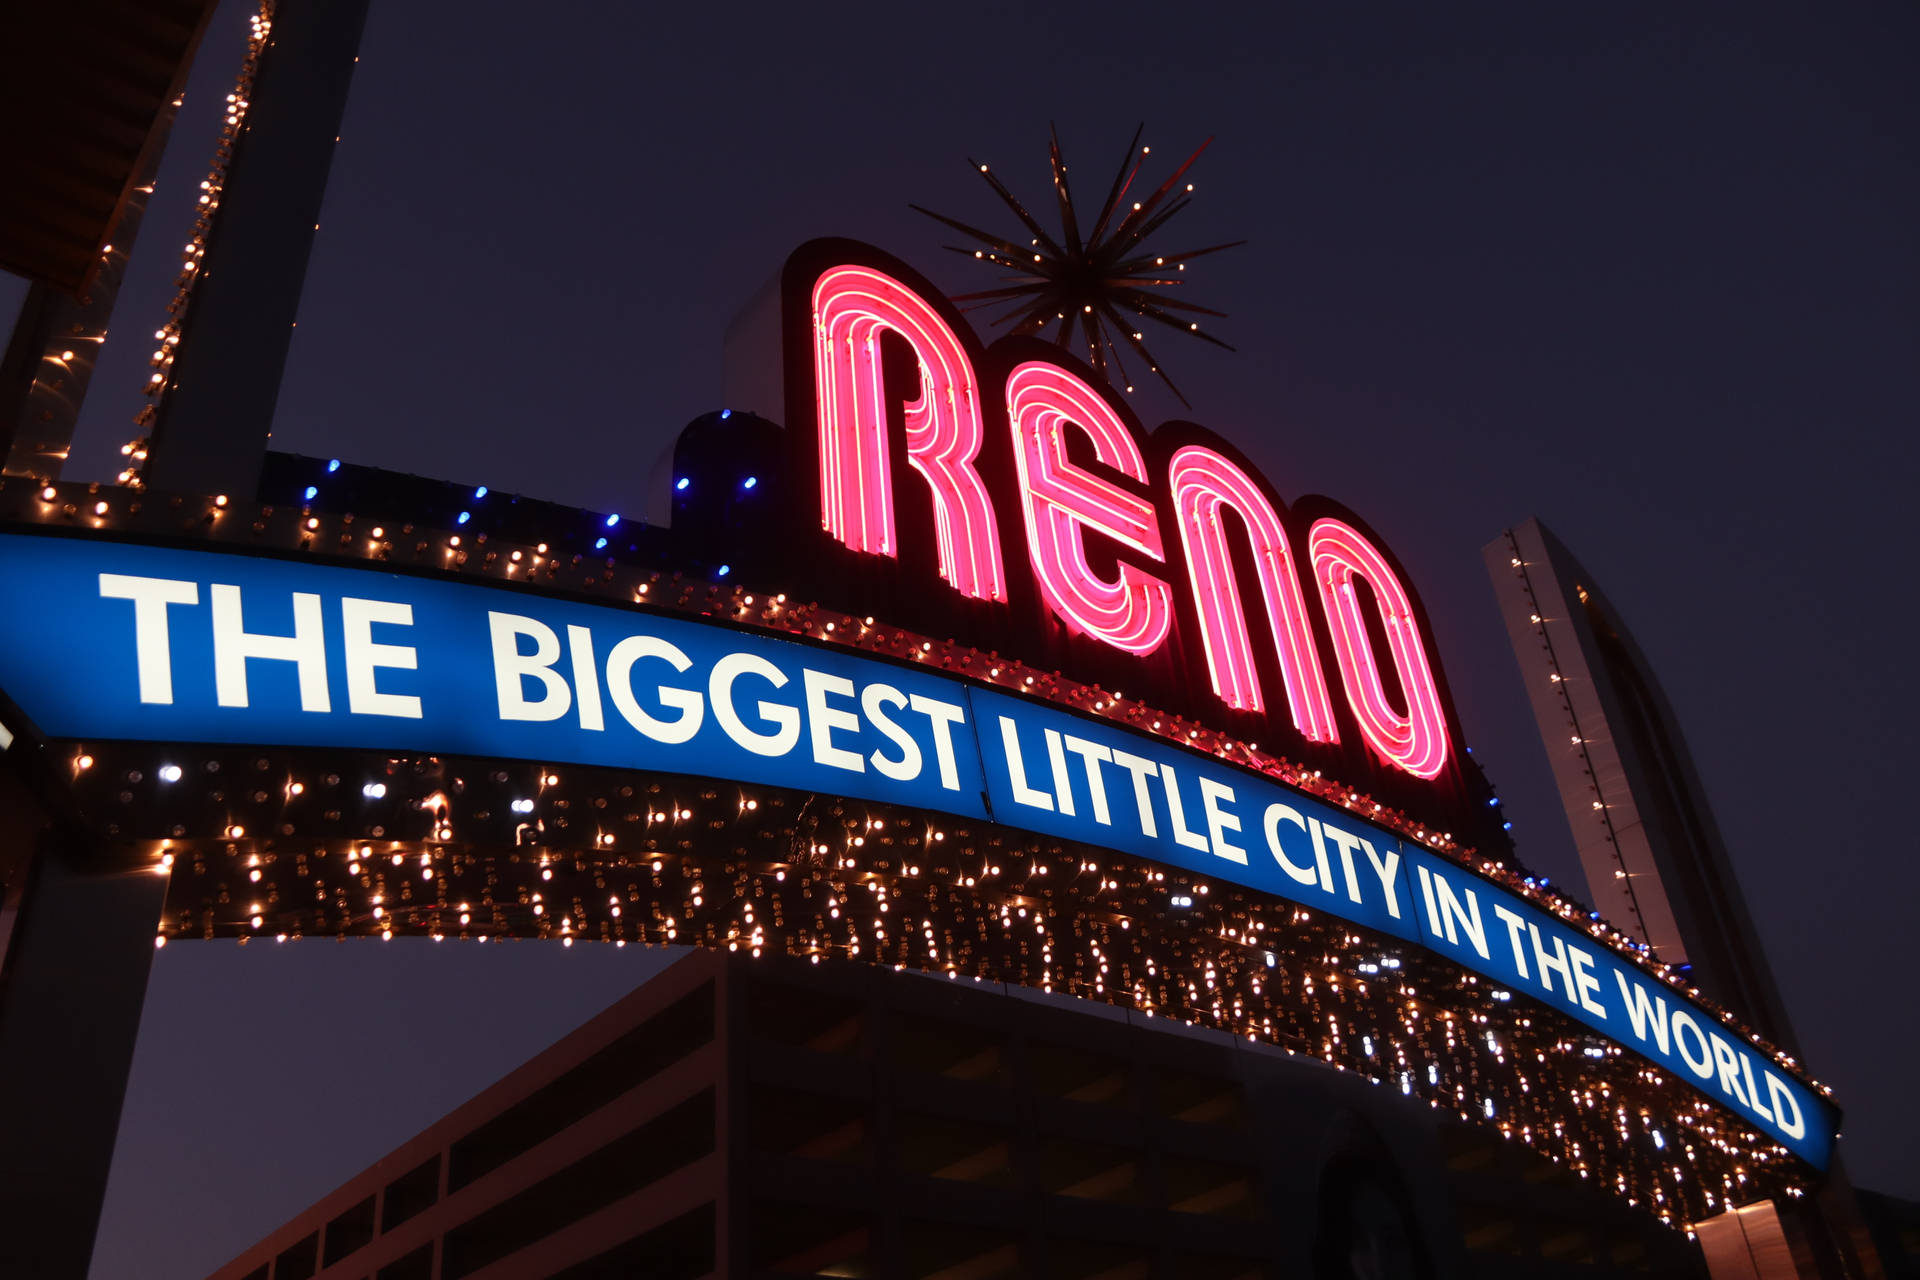 Reno, Nevada's Iconic "Biggest Little City in the World" Arch Wallpaper